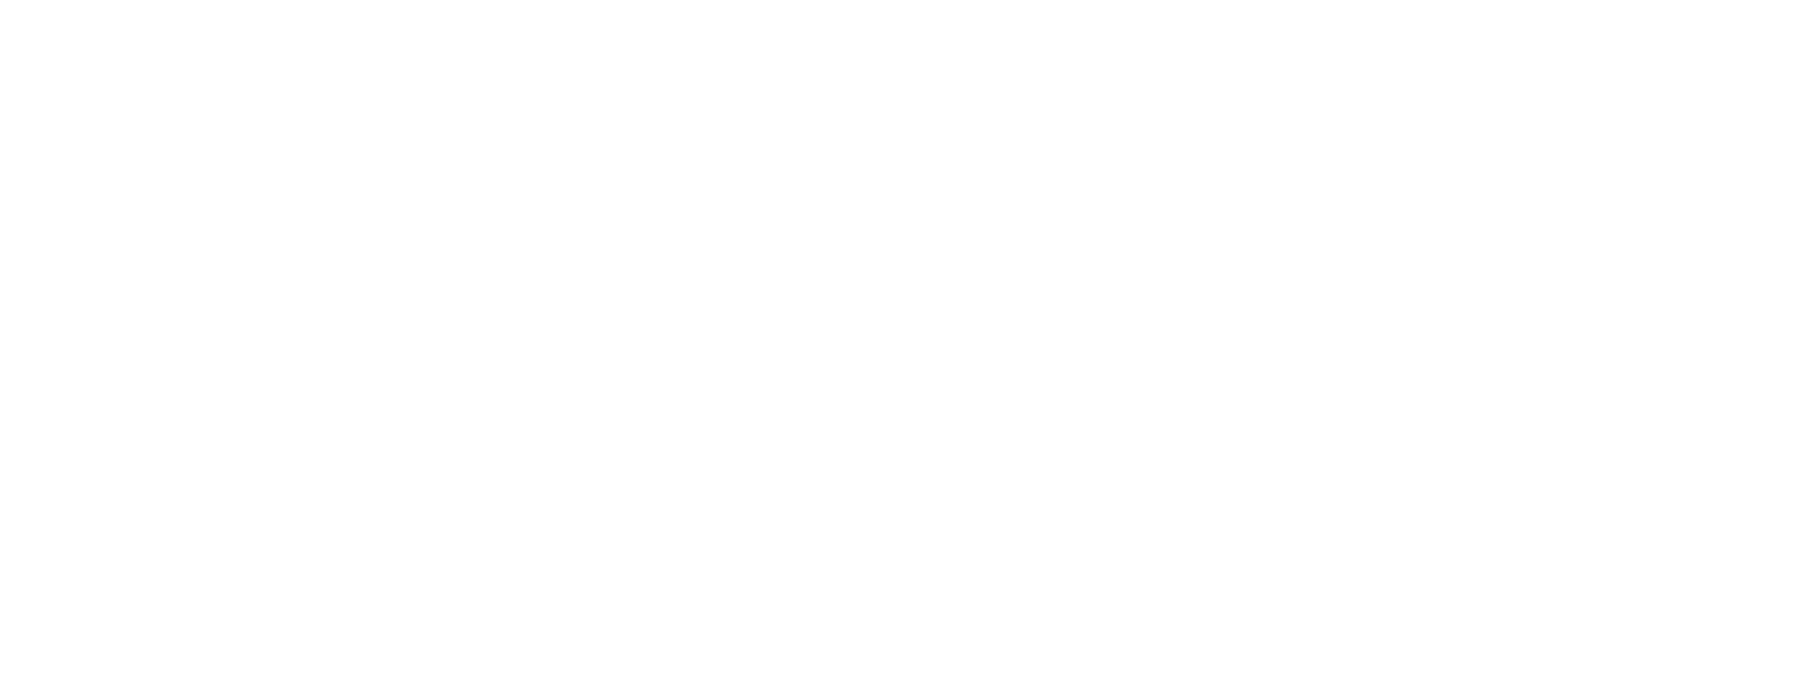 Bandit Productions horizontal lockup, font color is white.